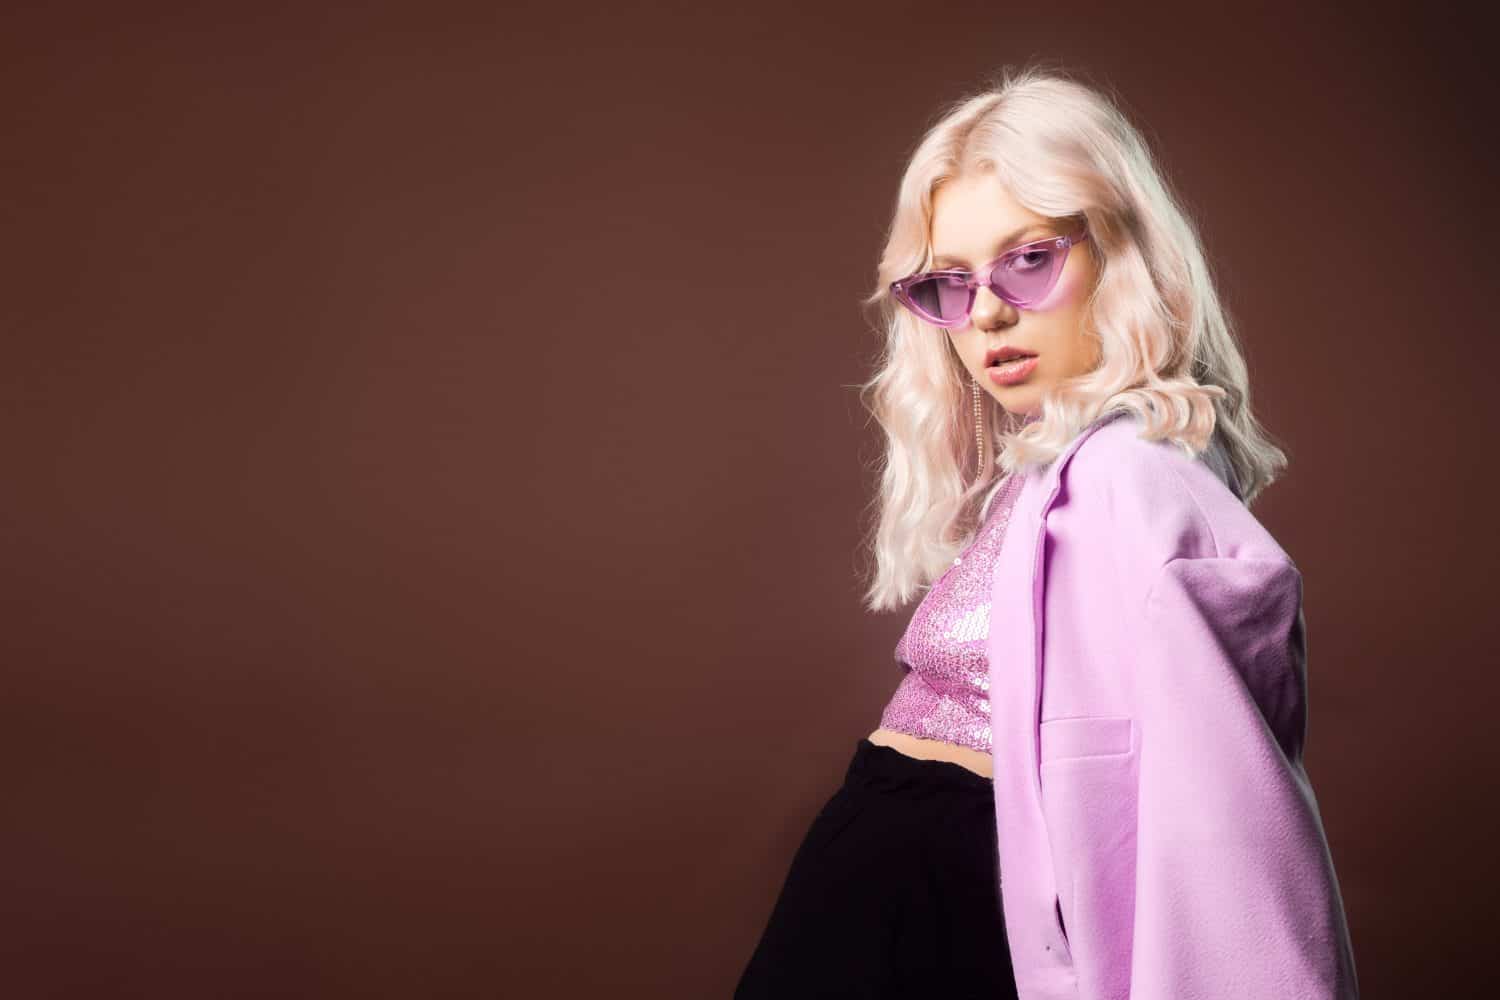 Blonde in a pink jacket with glasses, a jacket with sequins posing in the studio on a brown background. High fashion, 90s 80s. The girl dances and moves. Model